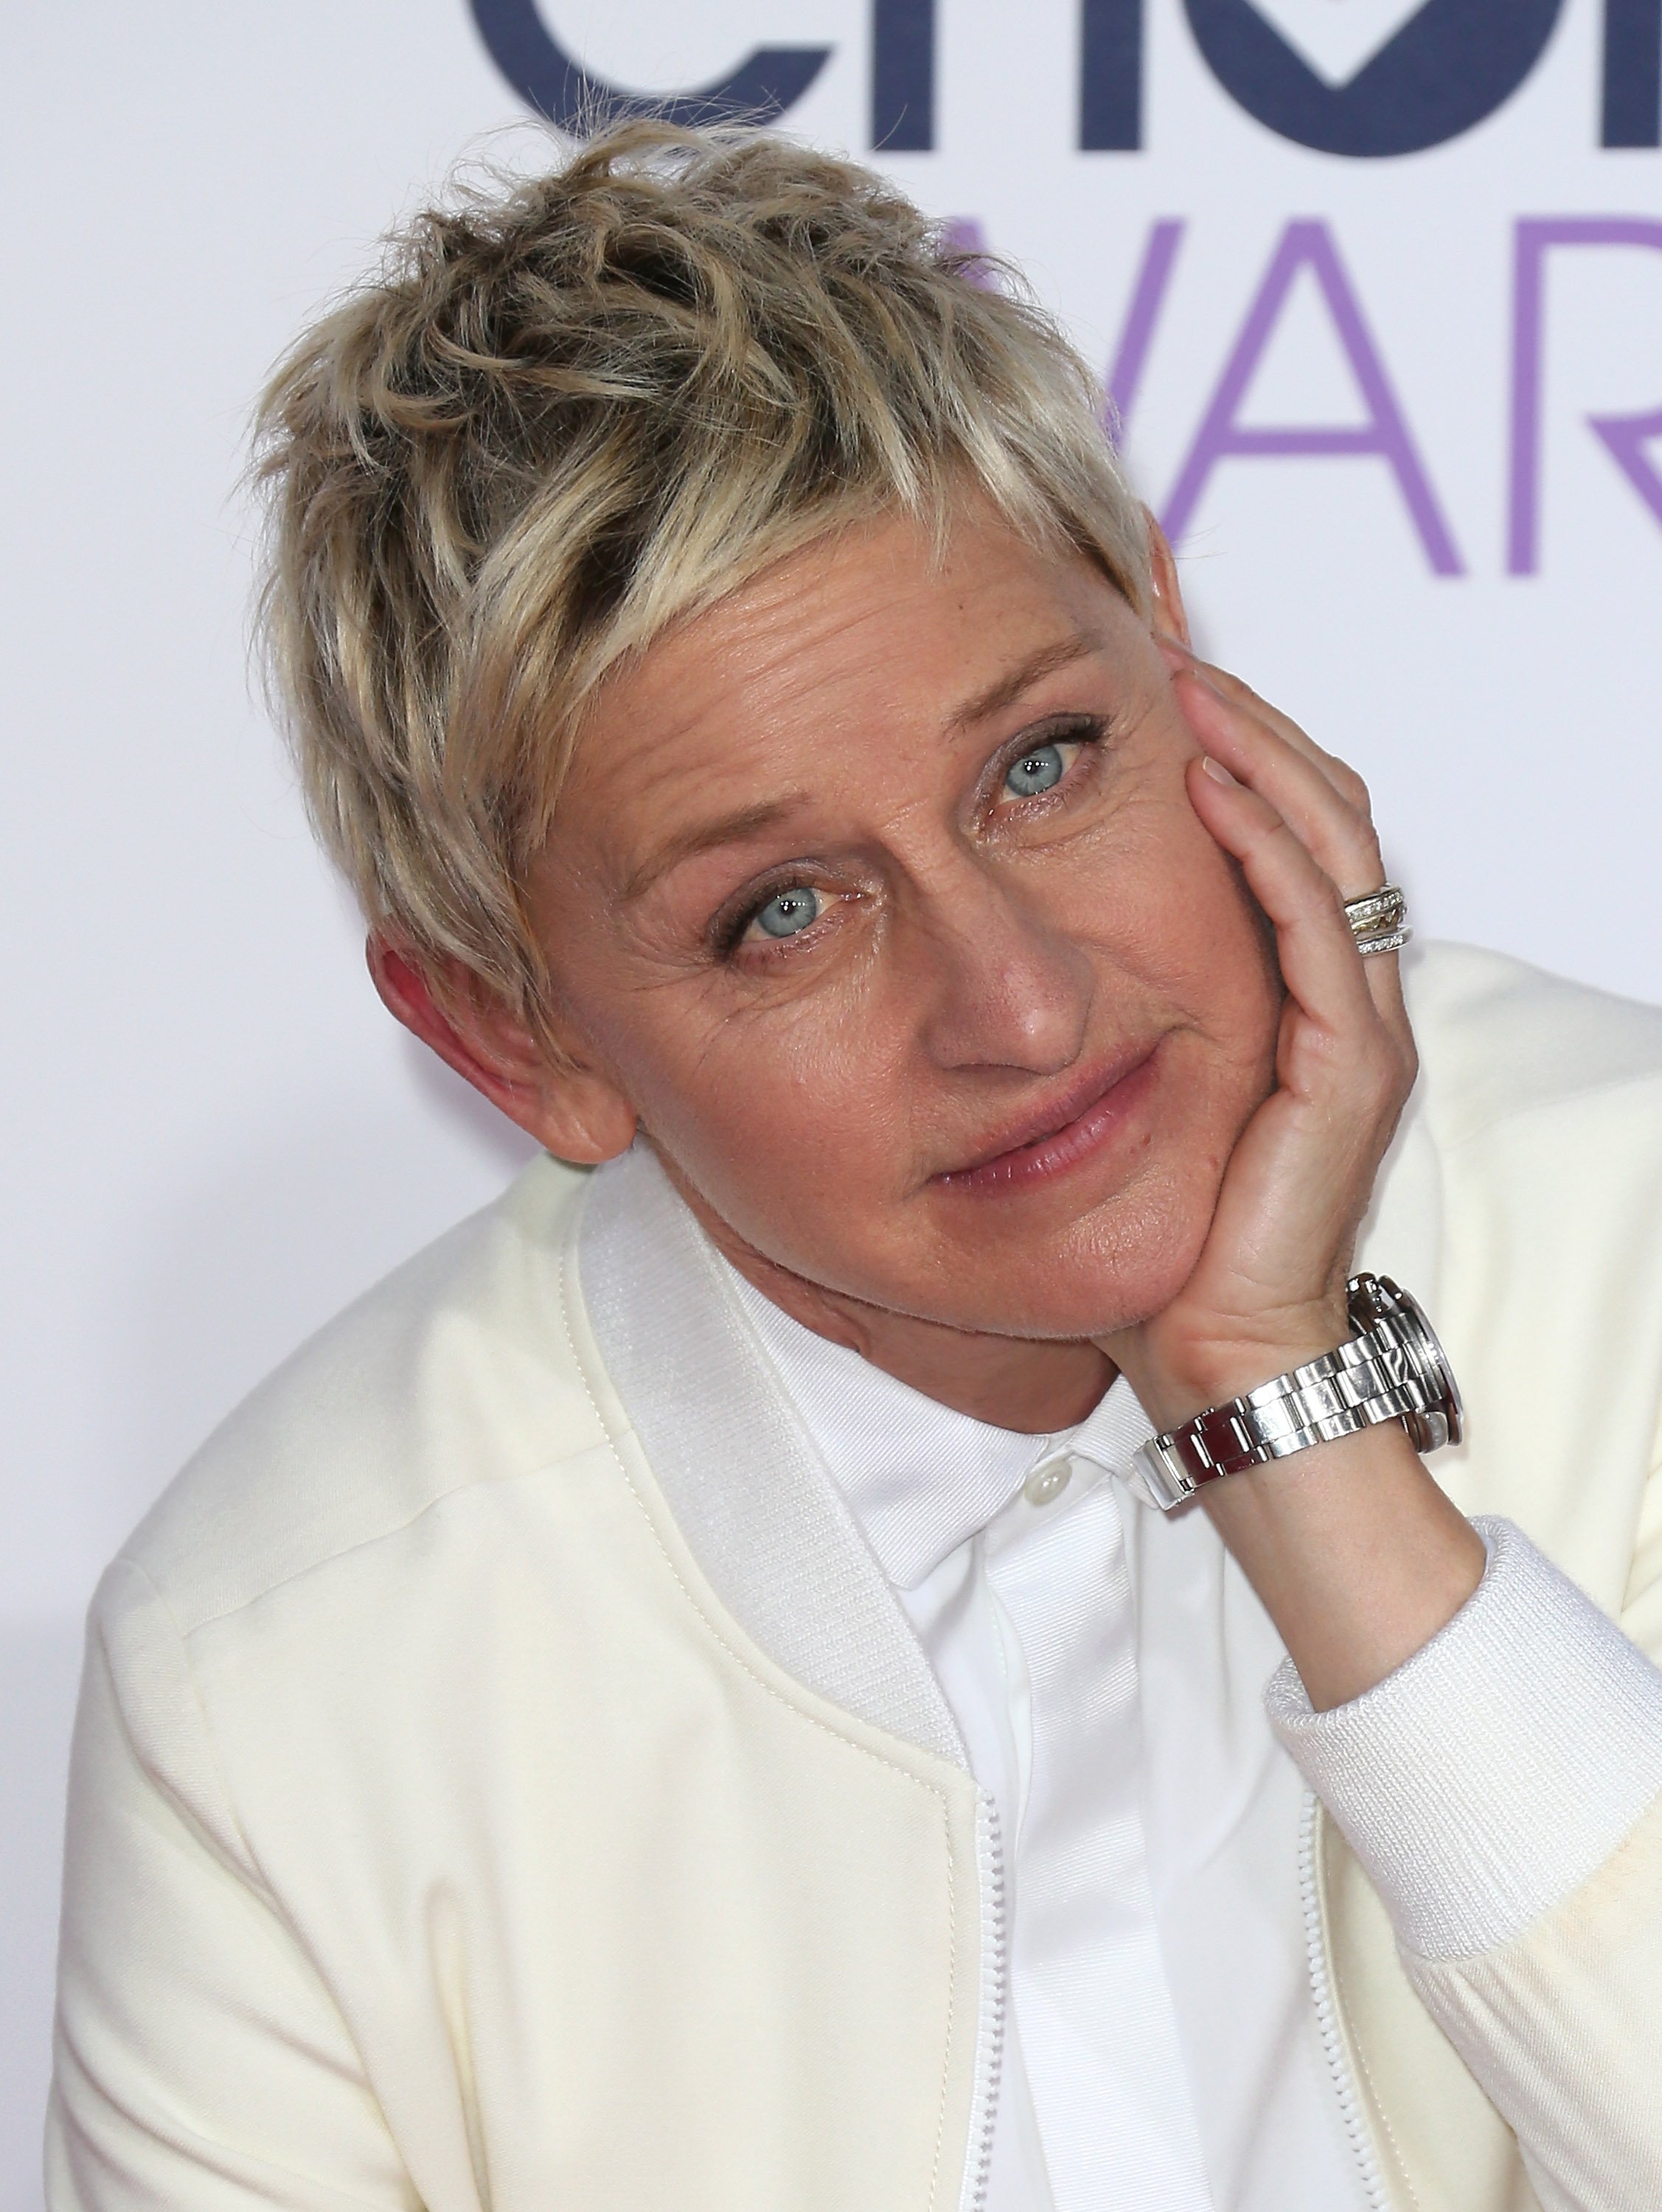 Ellen DeGeneres attends the People's Choice Awards in Los Angeles, California on January 7, 2015 | Photo: Getty Images